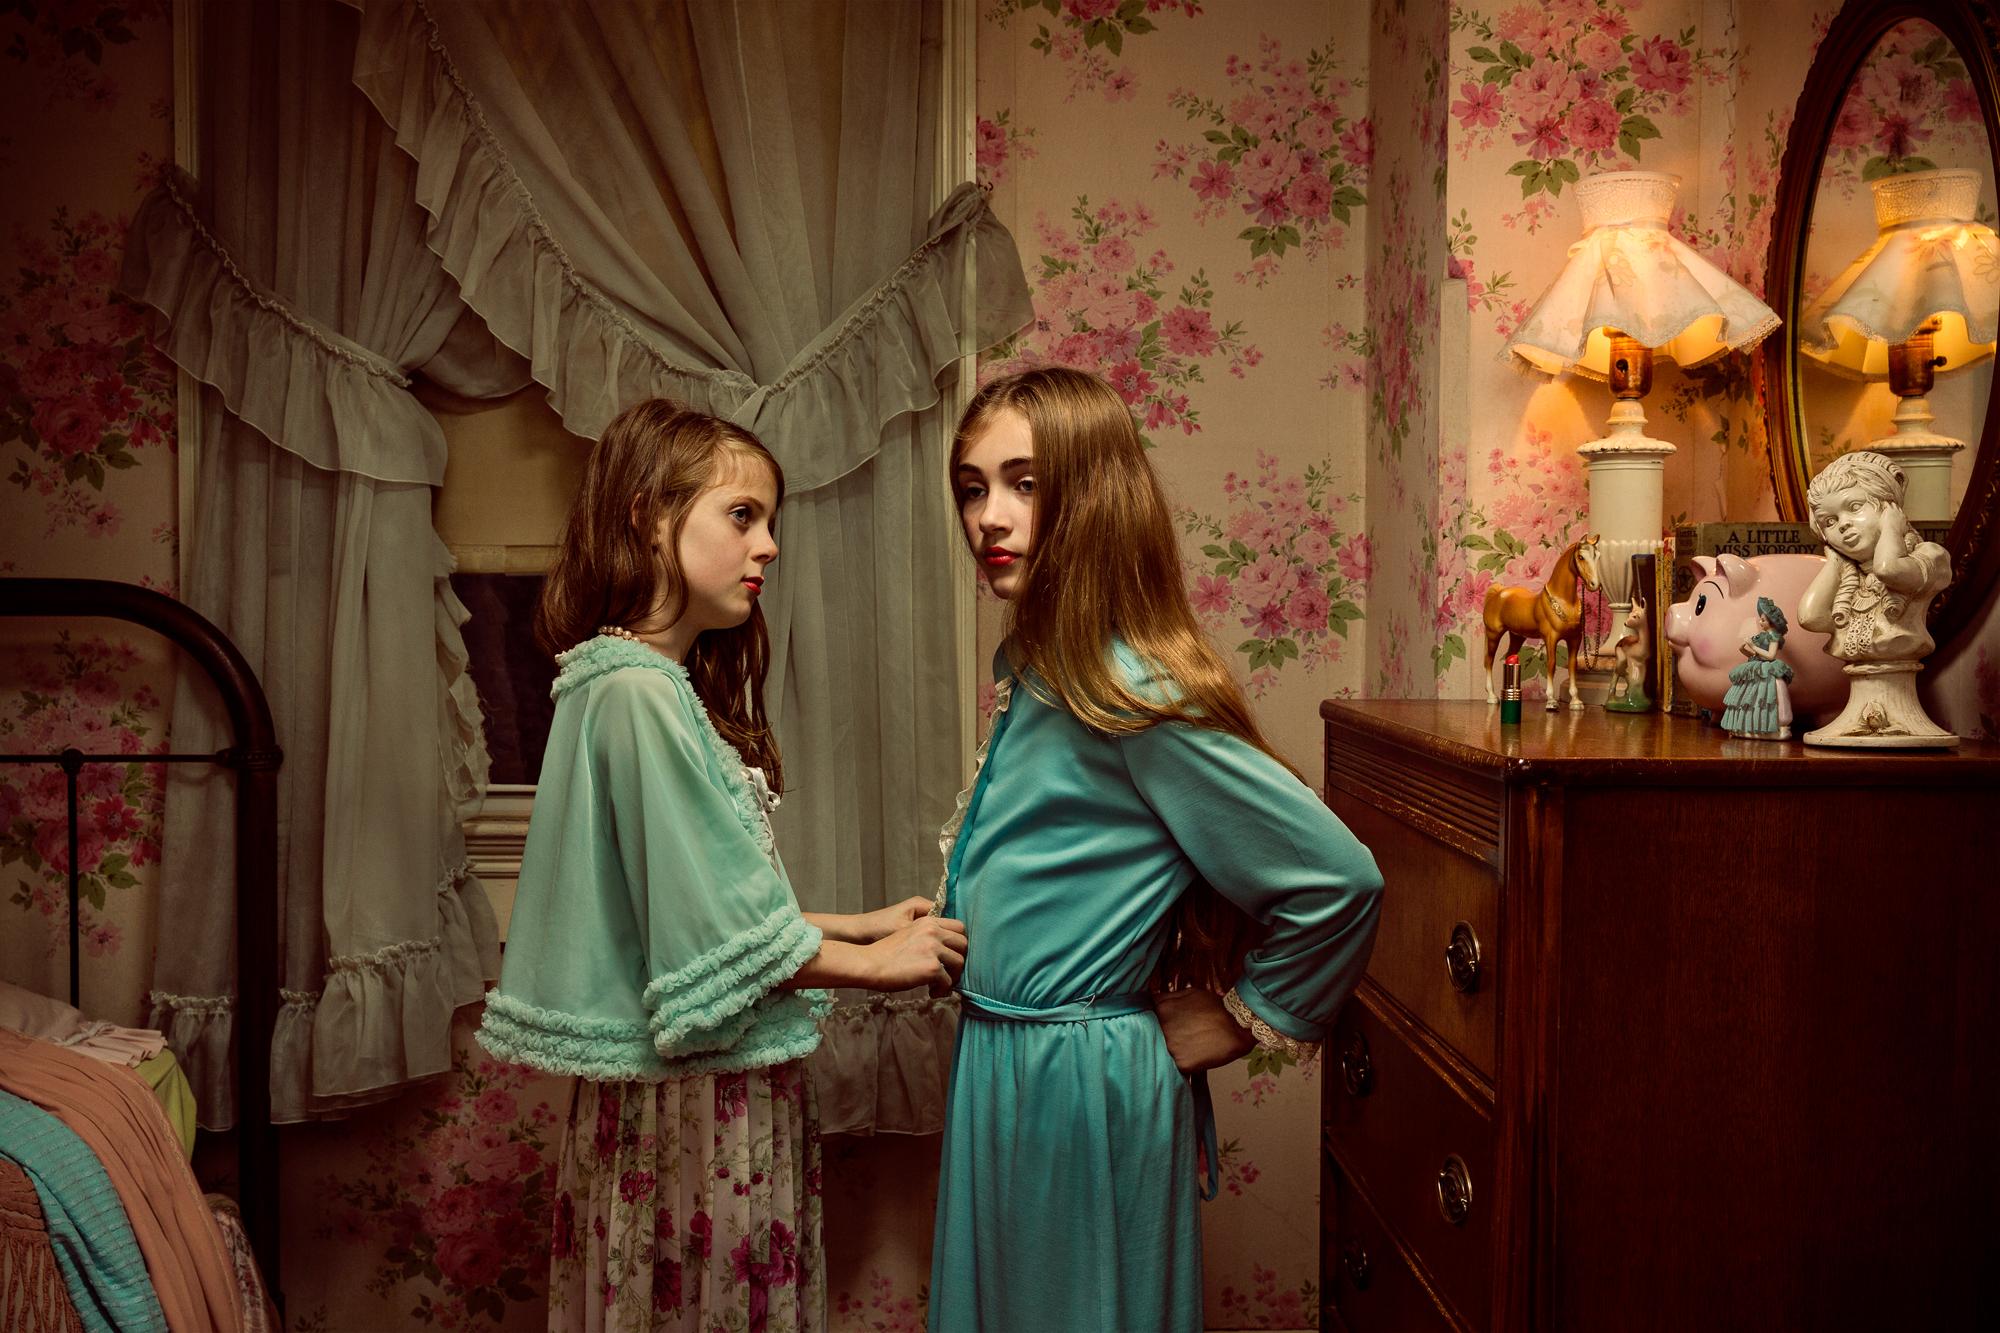 Holly Andres Figurative Photograph - Light Belmont House